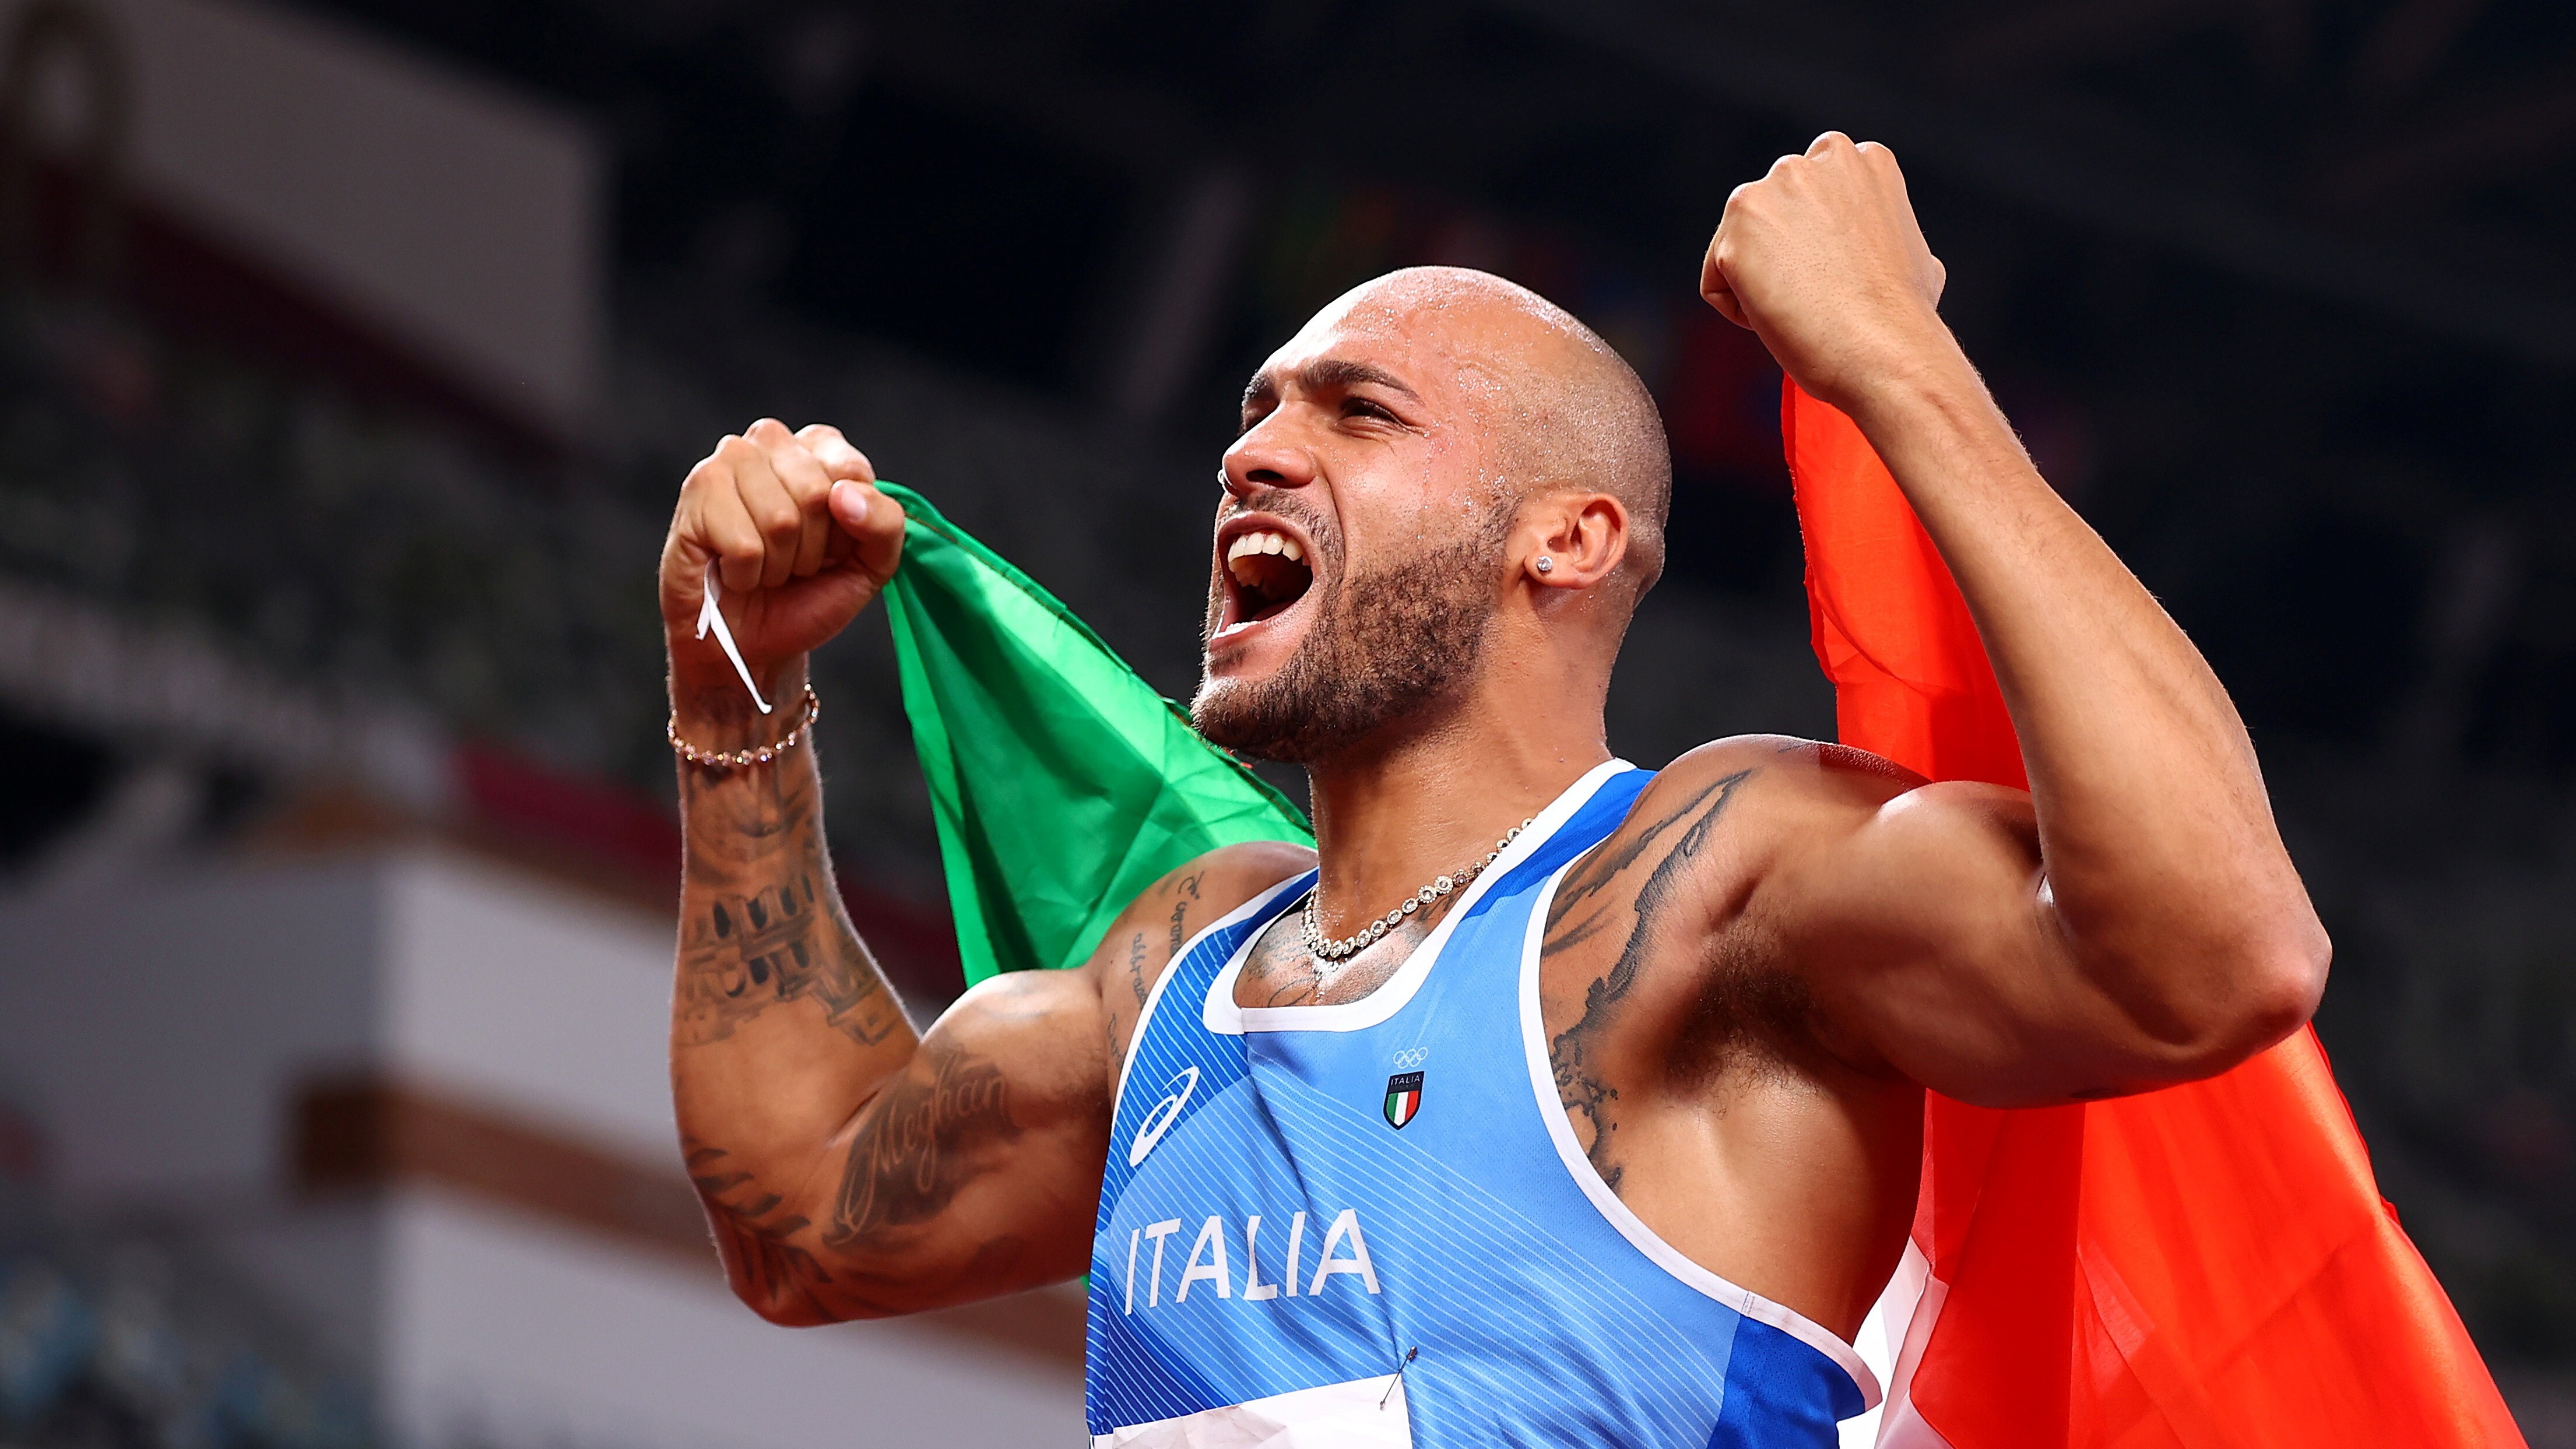 Italy’s Lamont Marcell Jacobs emerged from nowhere to be crowned fastest man on earth at the Tokyo Olympics. Photo: Reuters